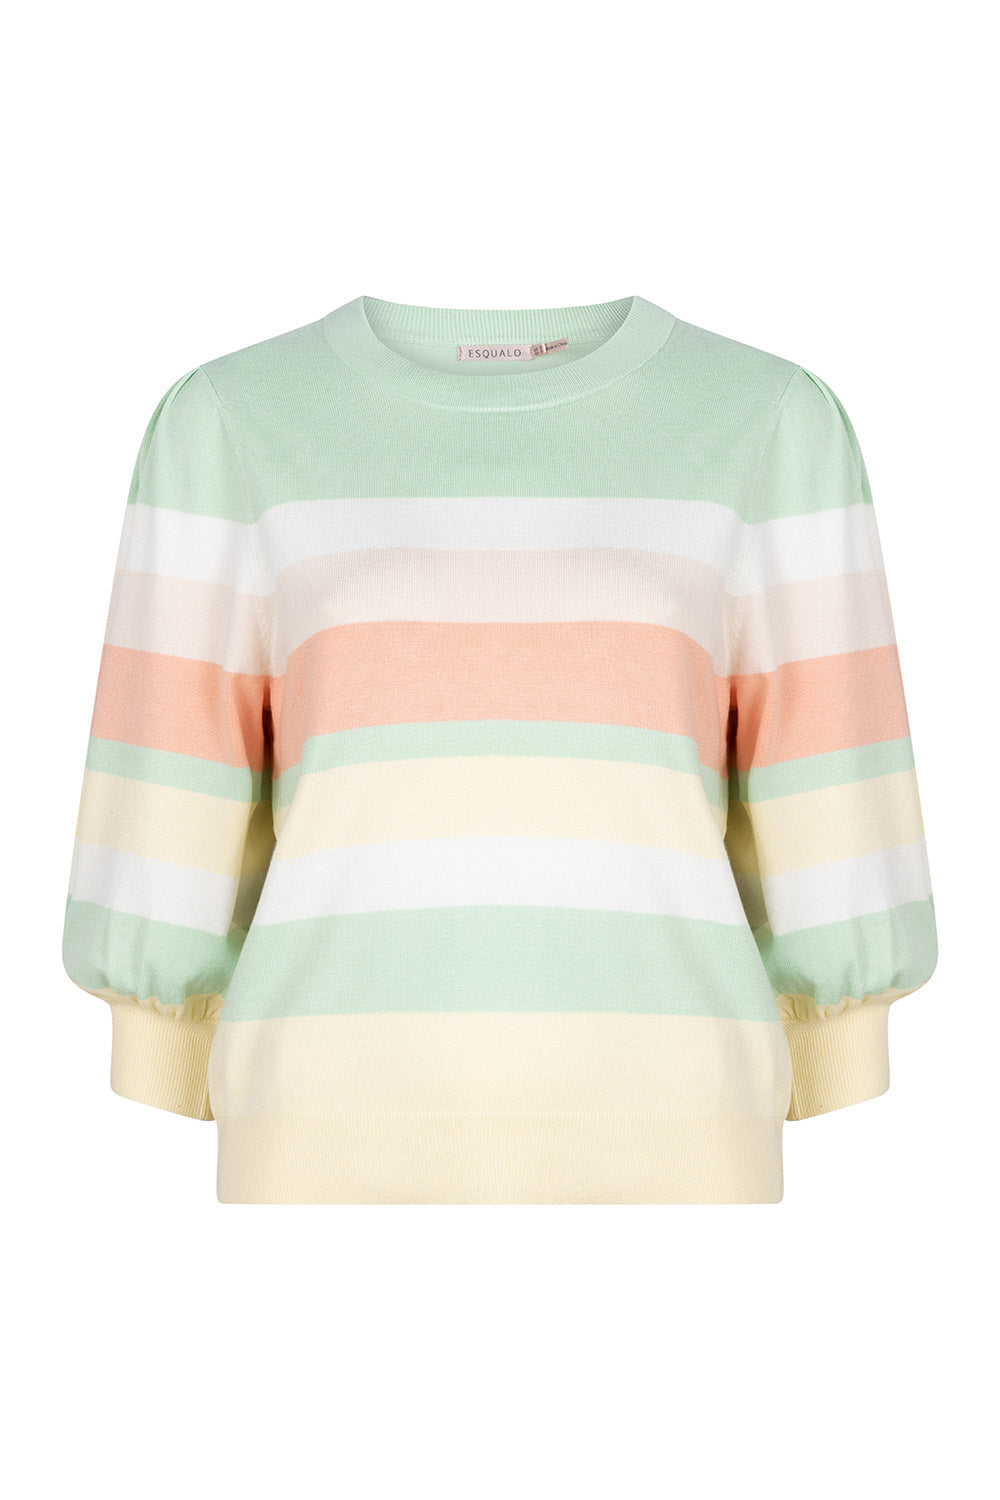 Esqualo (SP2407024) Women's 3/4 Sleeve Pastel Striped Sweater in pastel green, yellow & pink